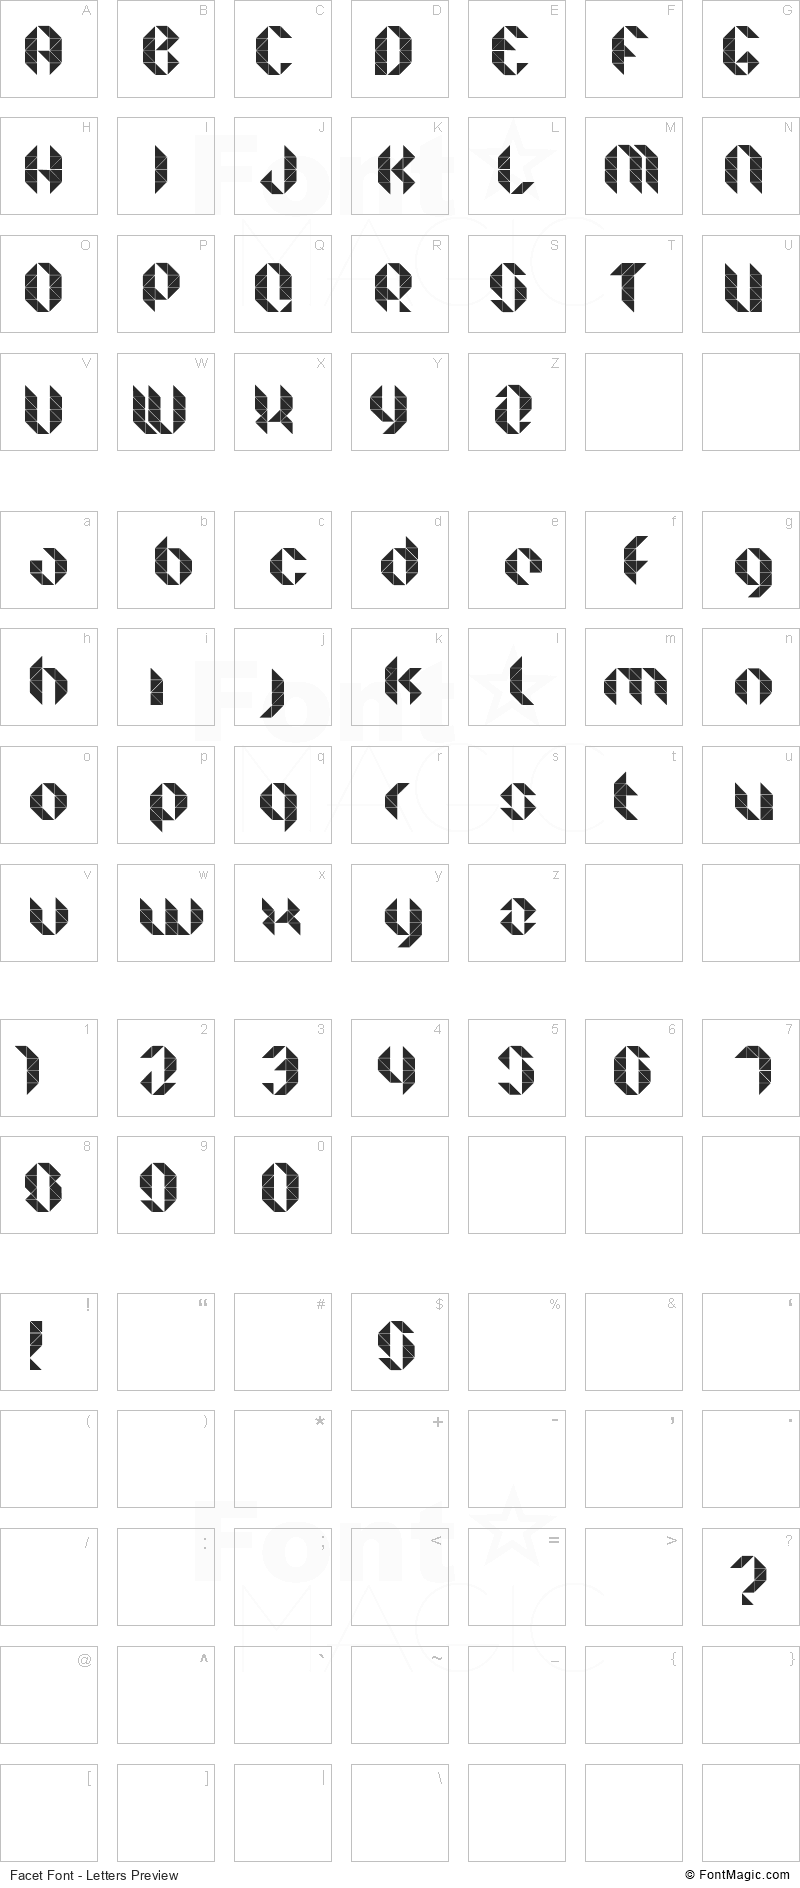 Facet Font - All Latters Preview Chart